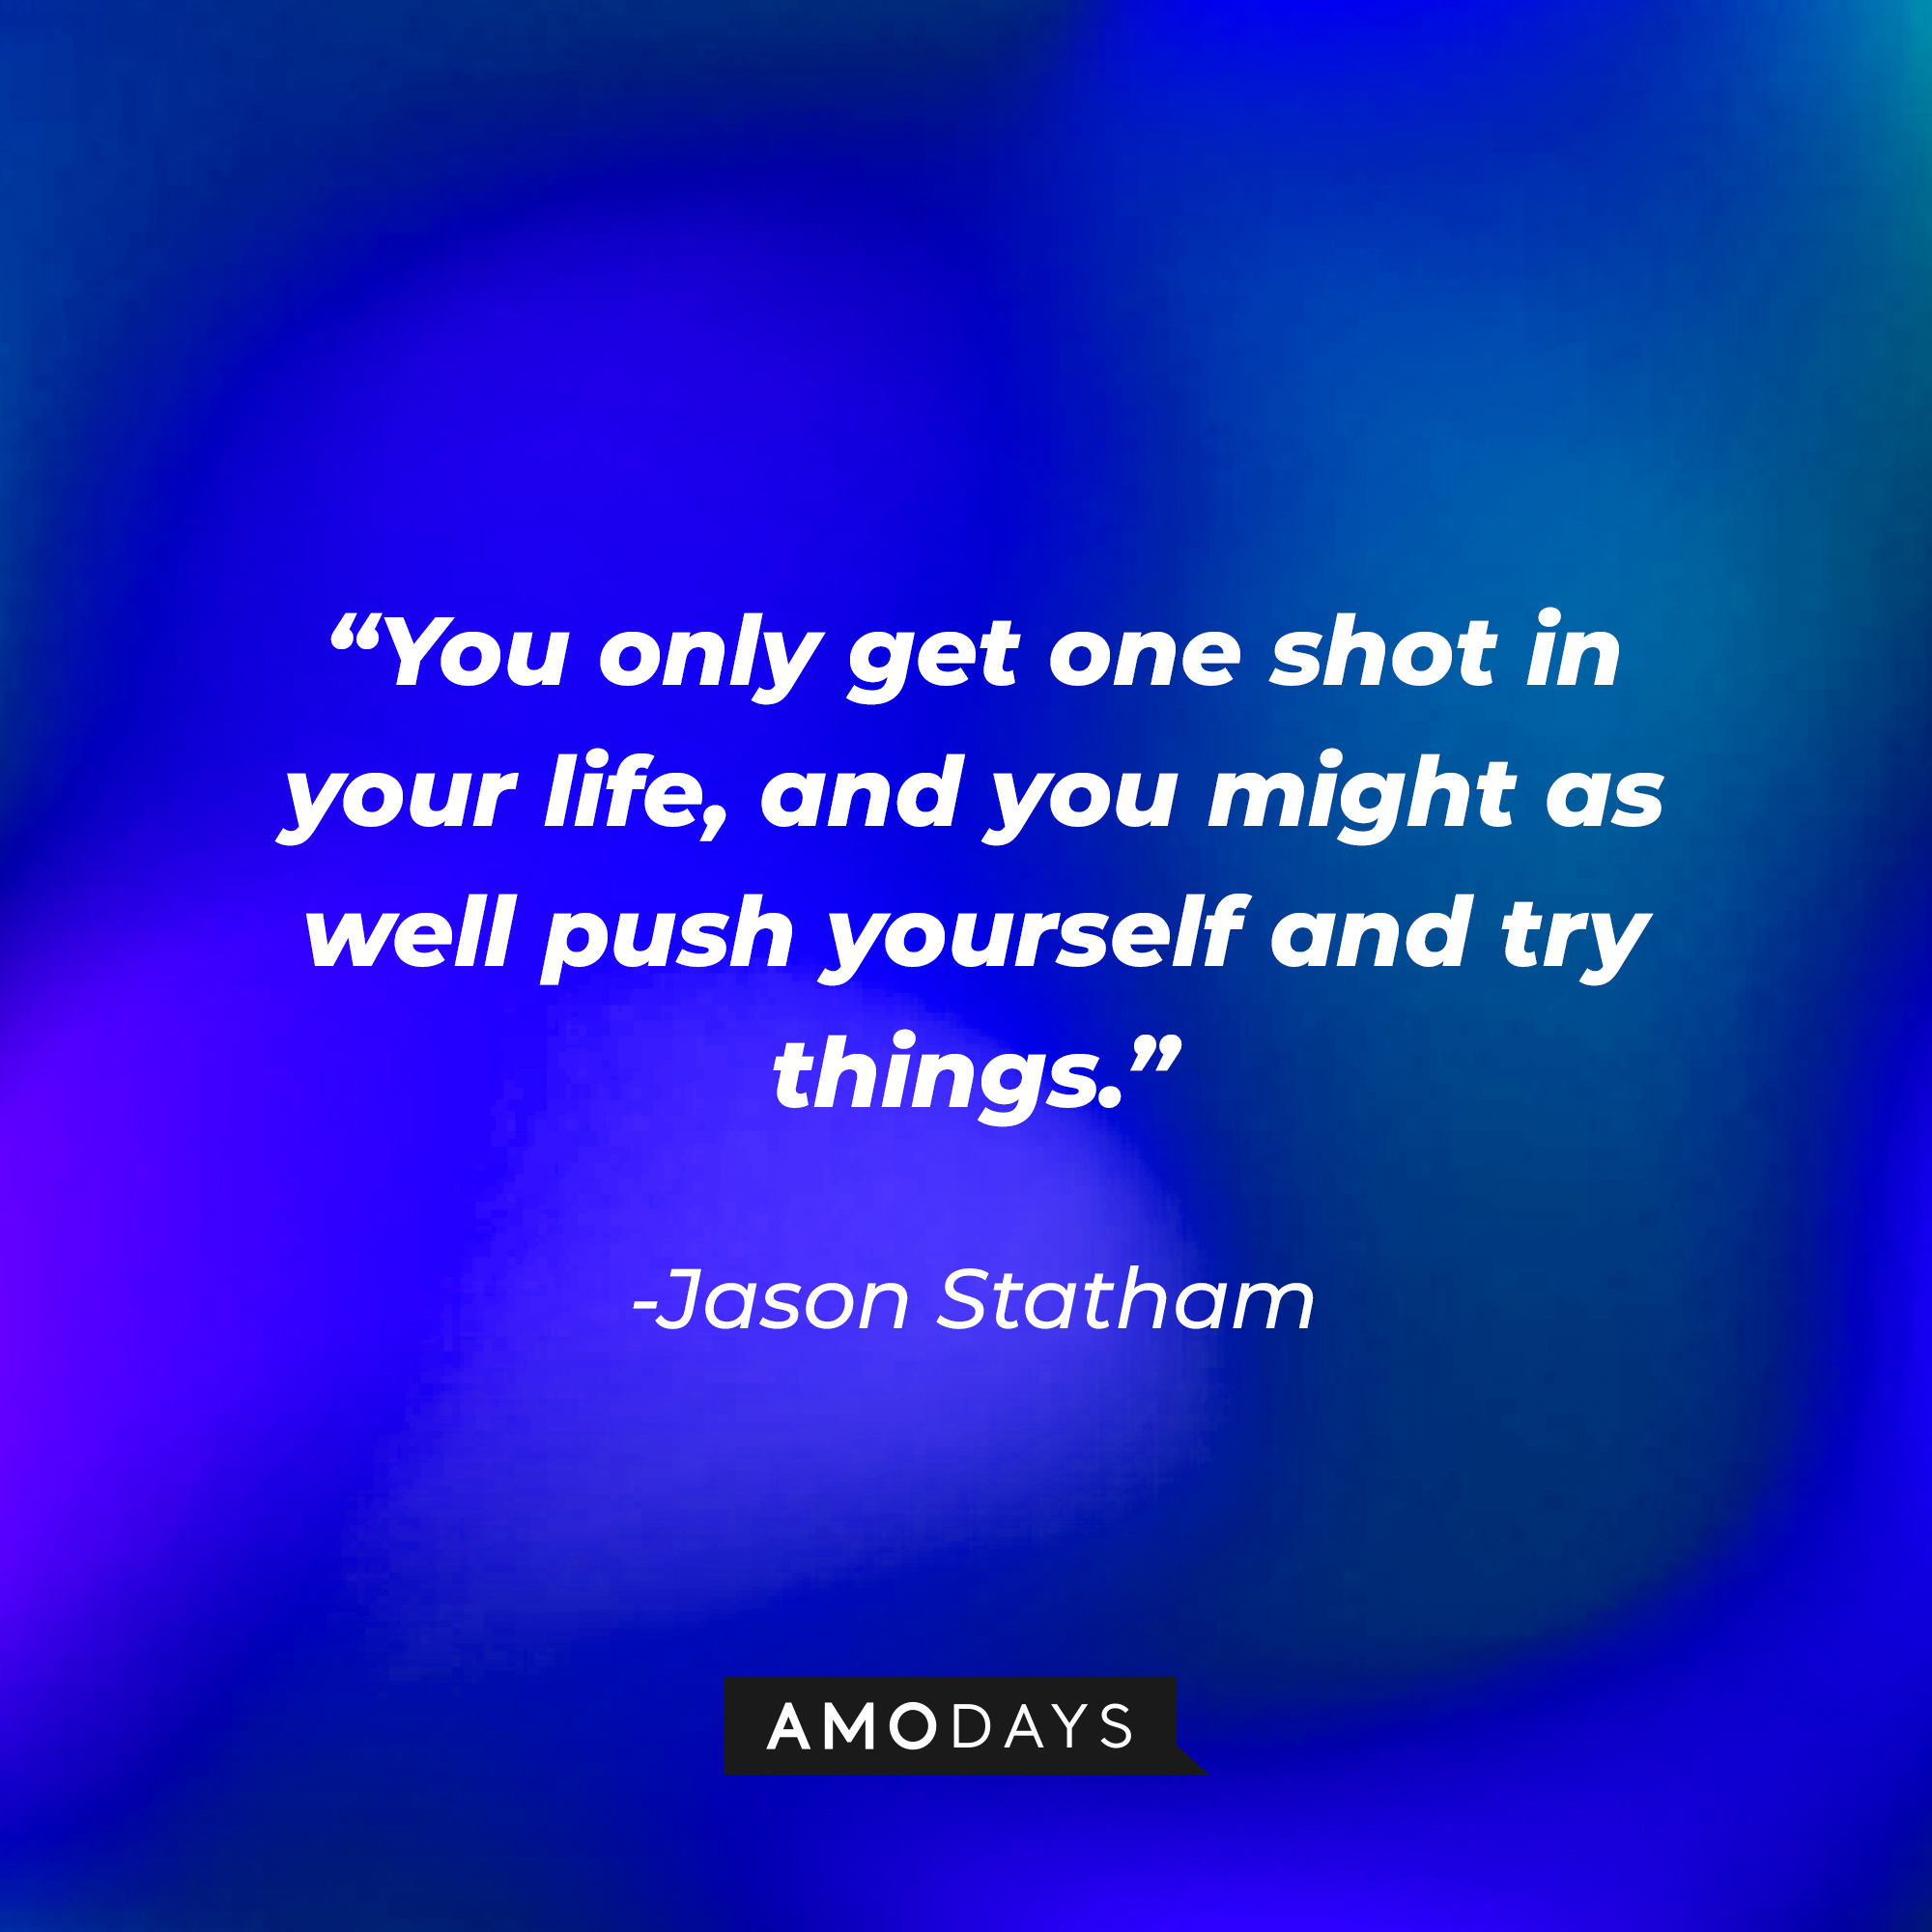 Jason Statham's quote: “You only get one shot in your life, and you might as well push yourself and try things.” | Source: Amodays